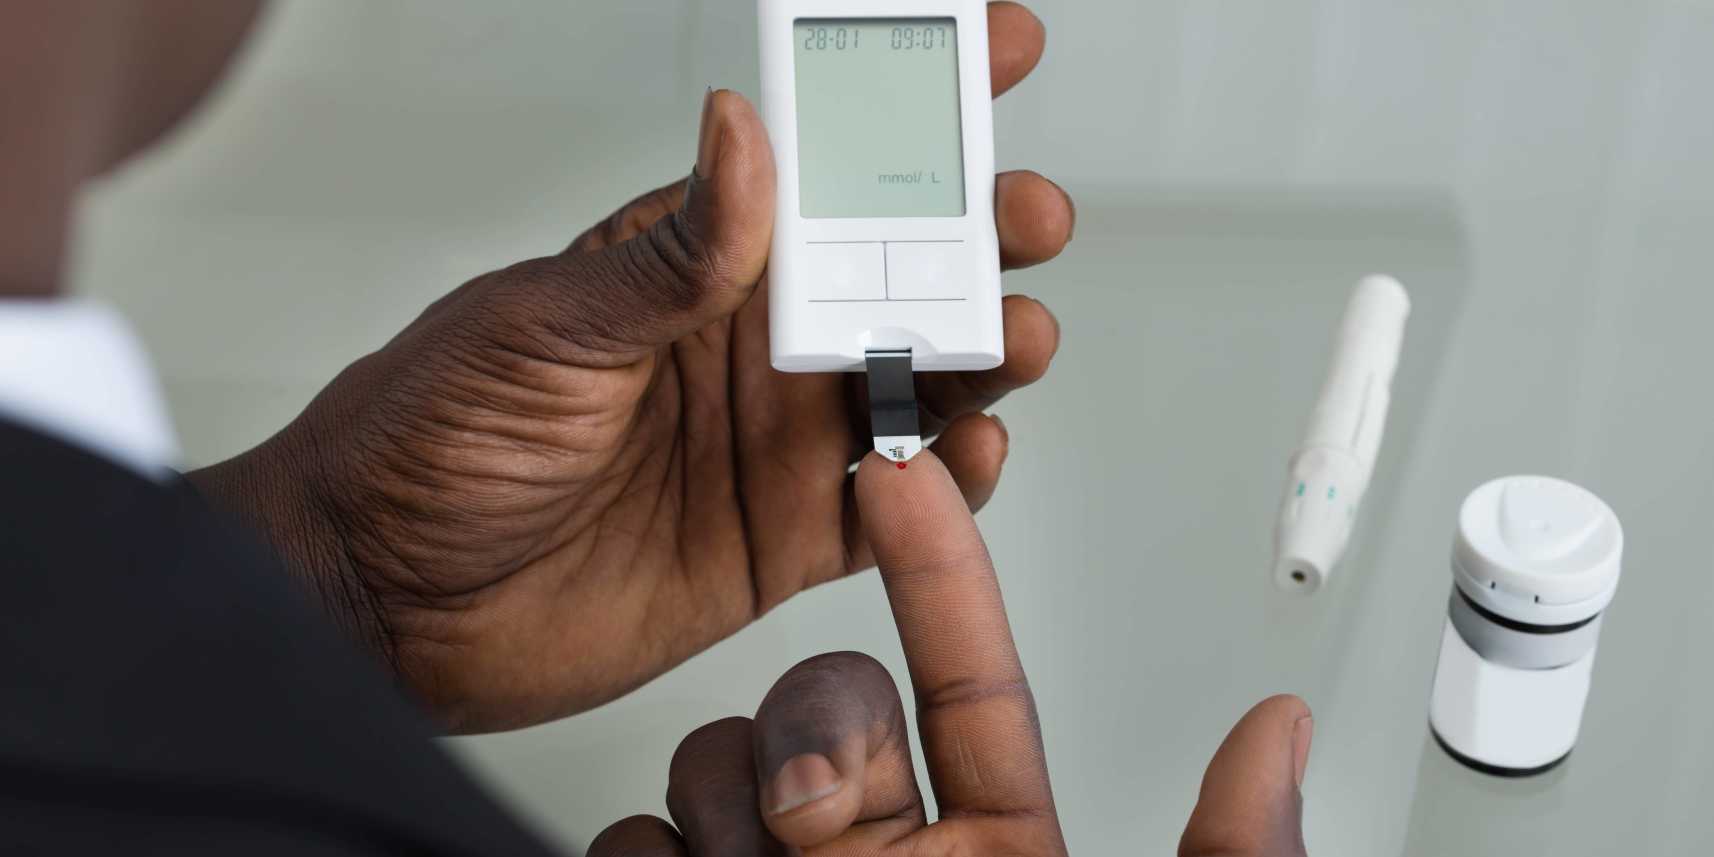 Person with diabetes using glucometer after receiving a prescription for GLP-1